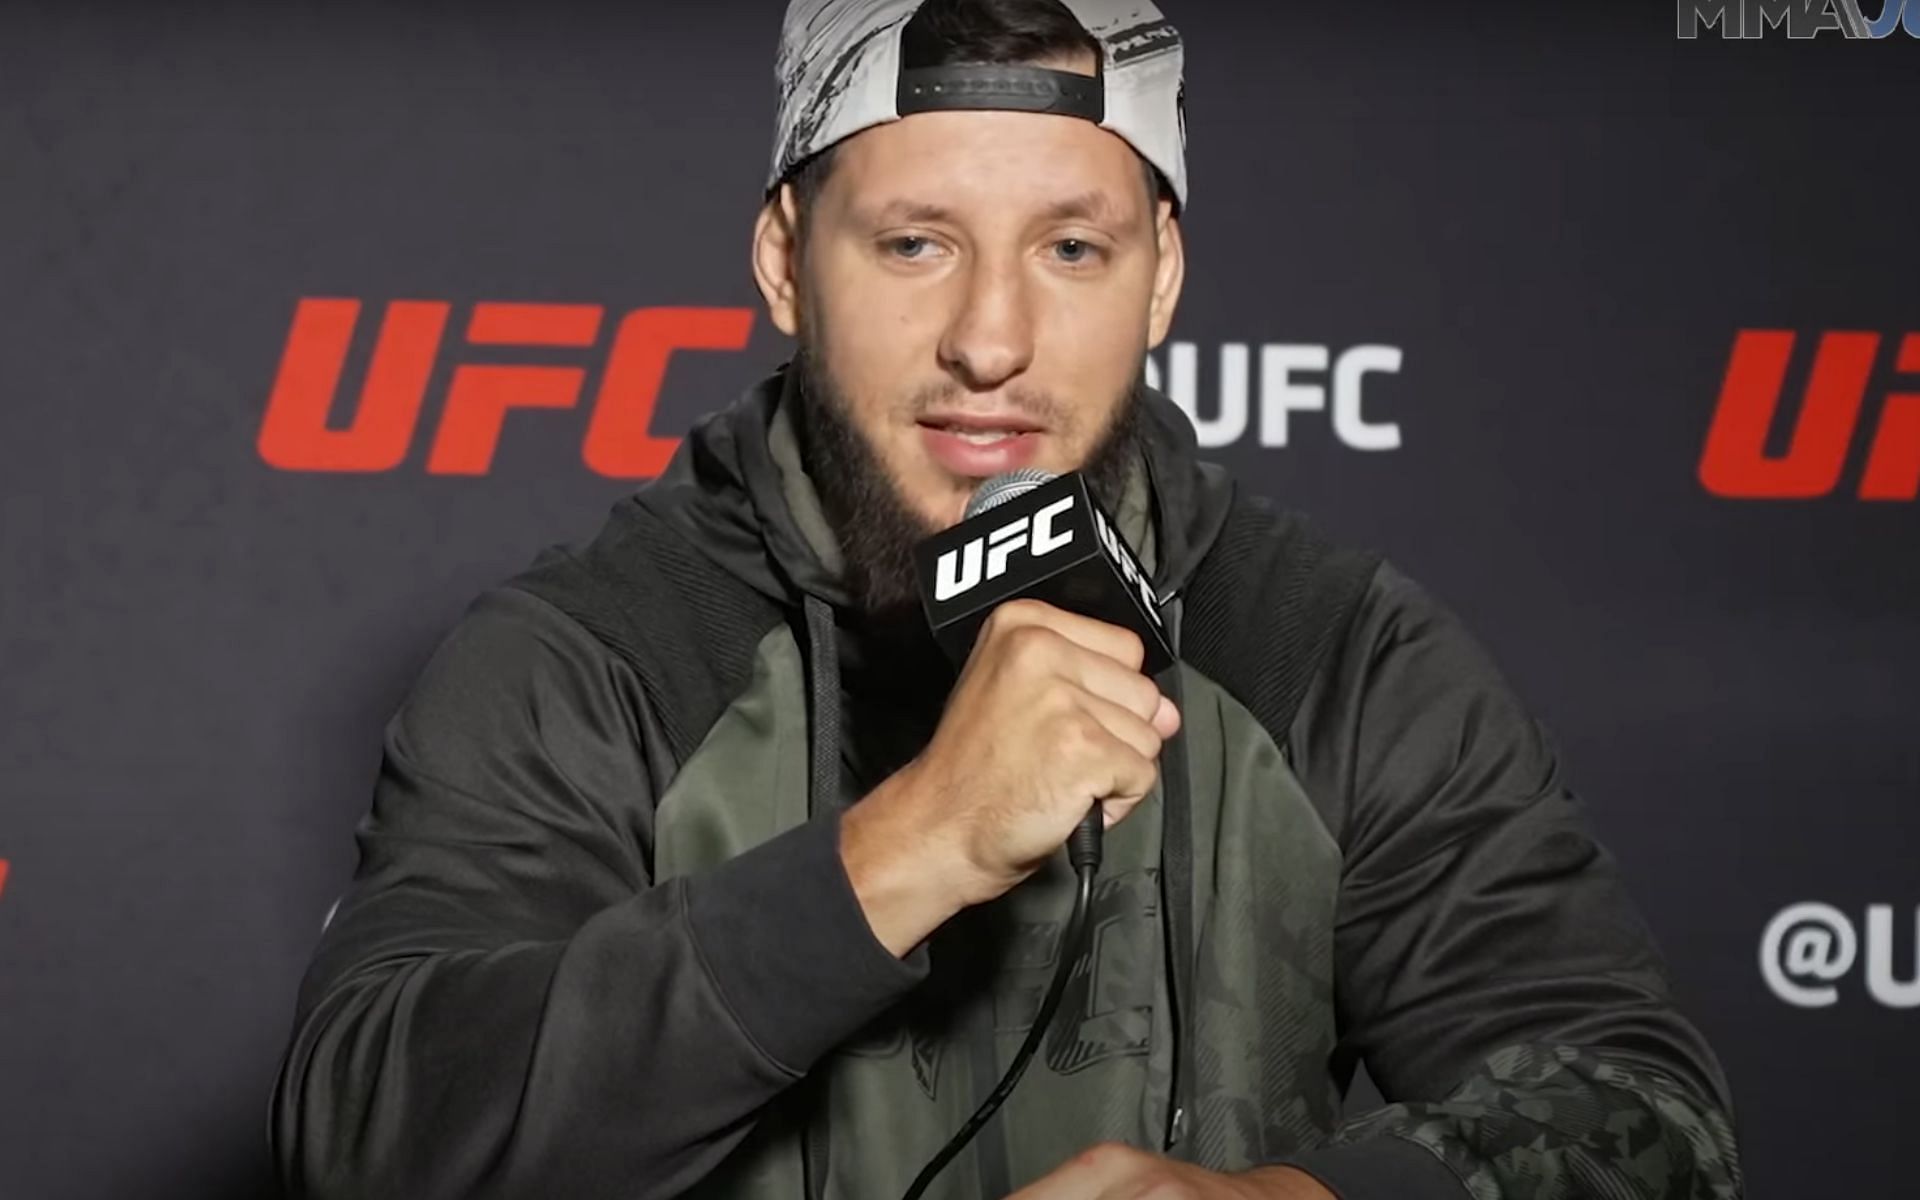 Askar Mozharov at a UFC press conference before his debut [Image courtesy MMA Junkie YouTube]